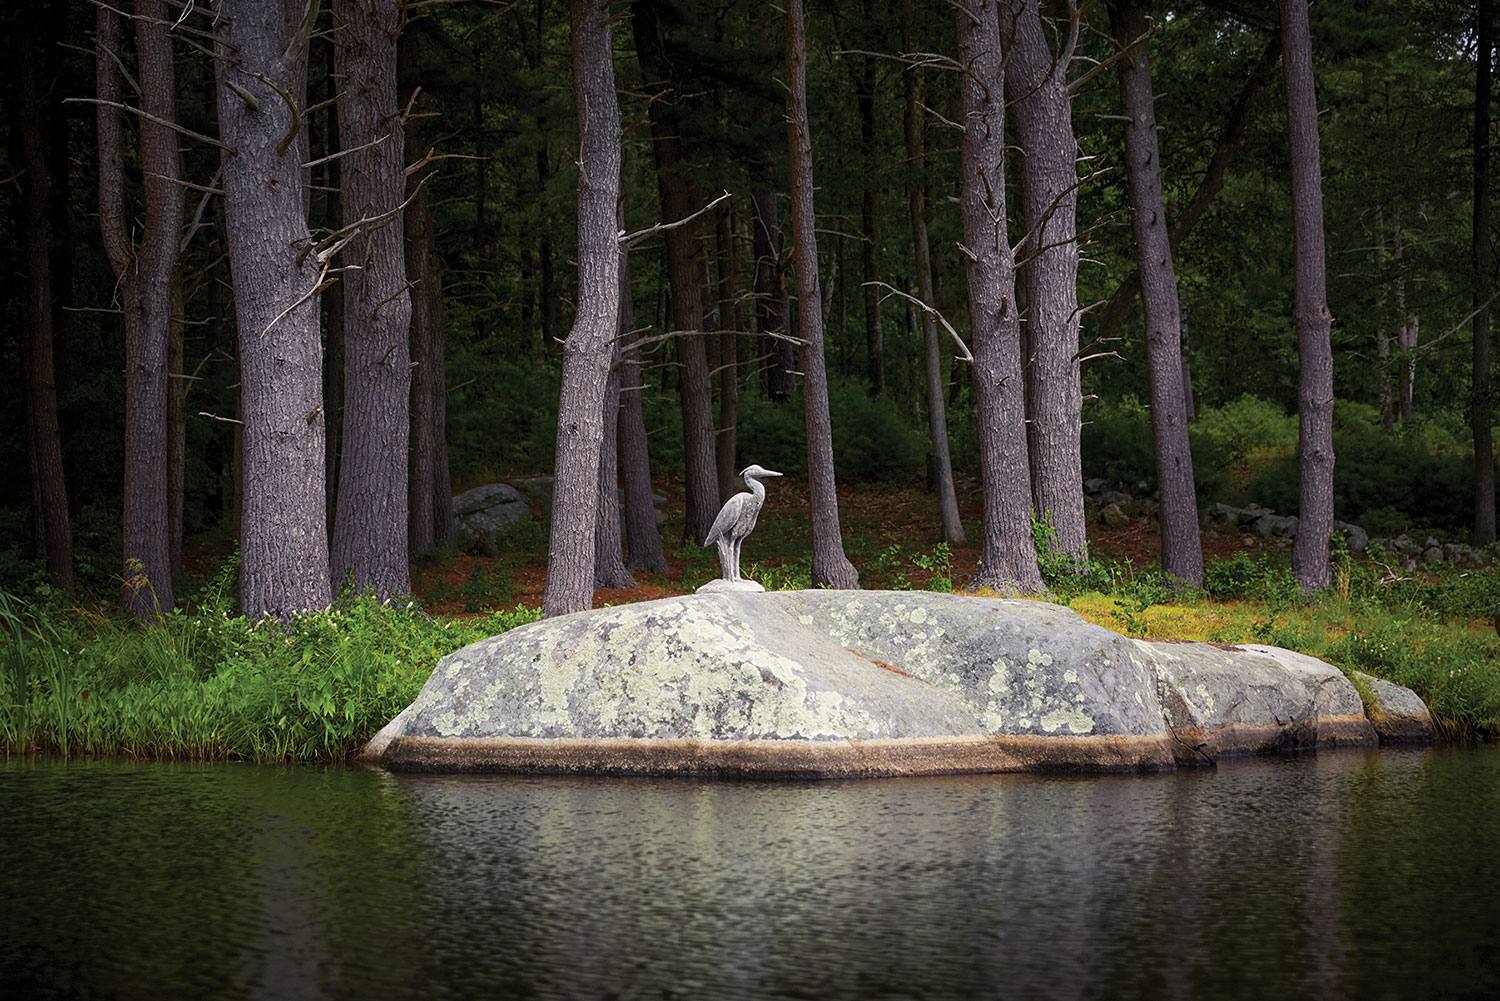 The statue stands on a large rock at the edge of a body of water. In the background is a dense forest.